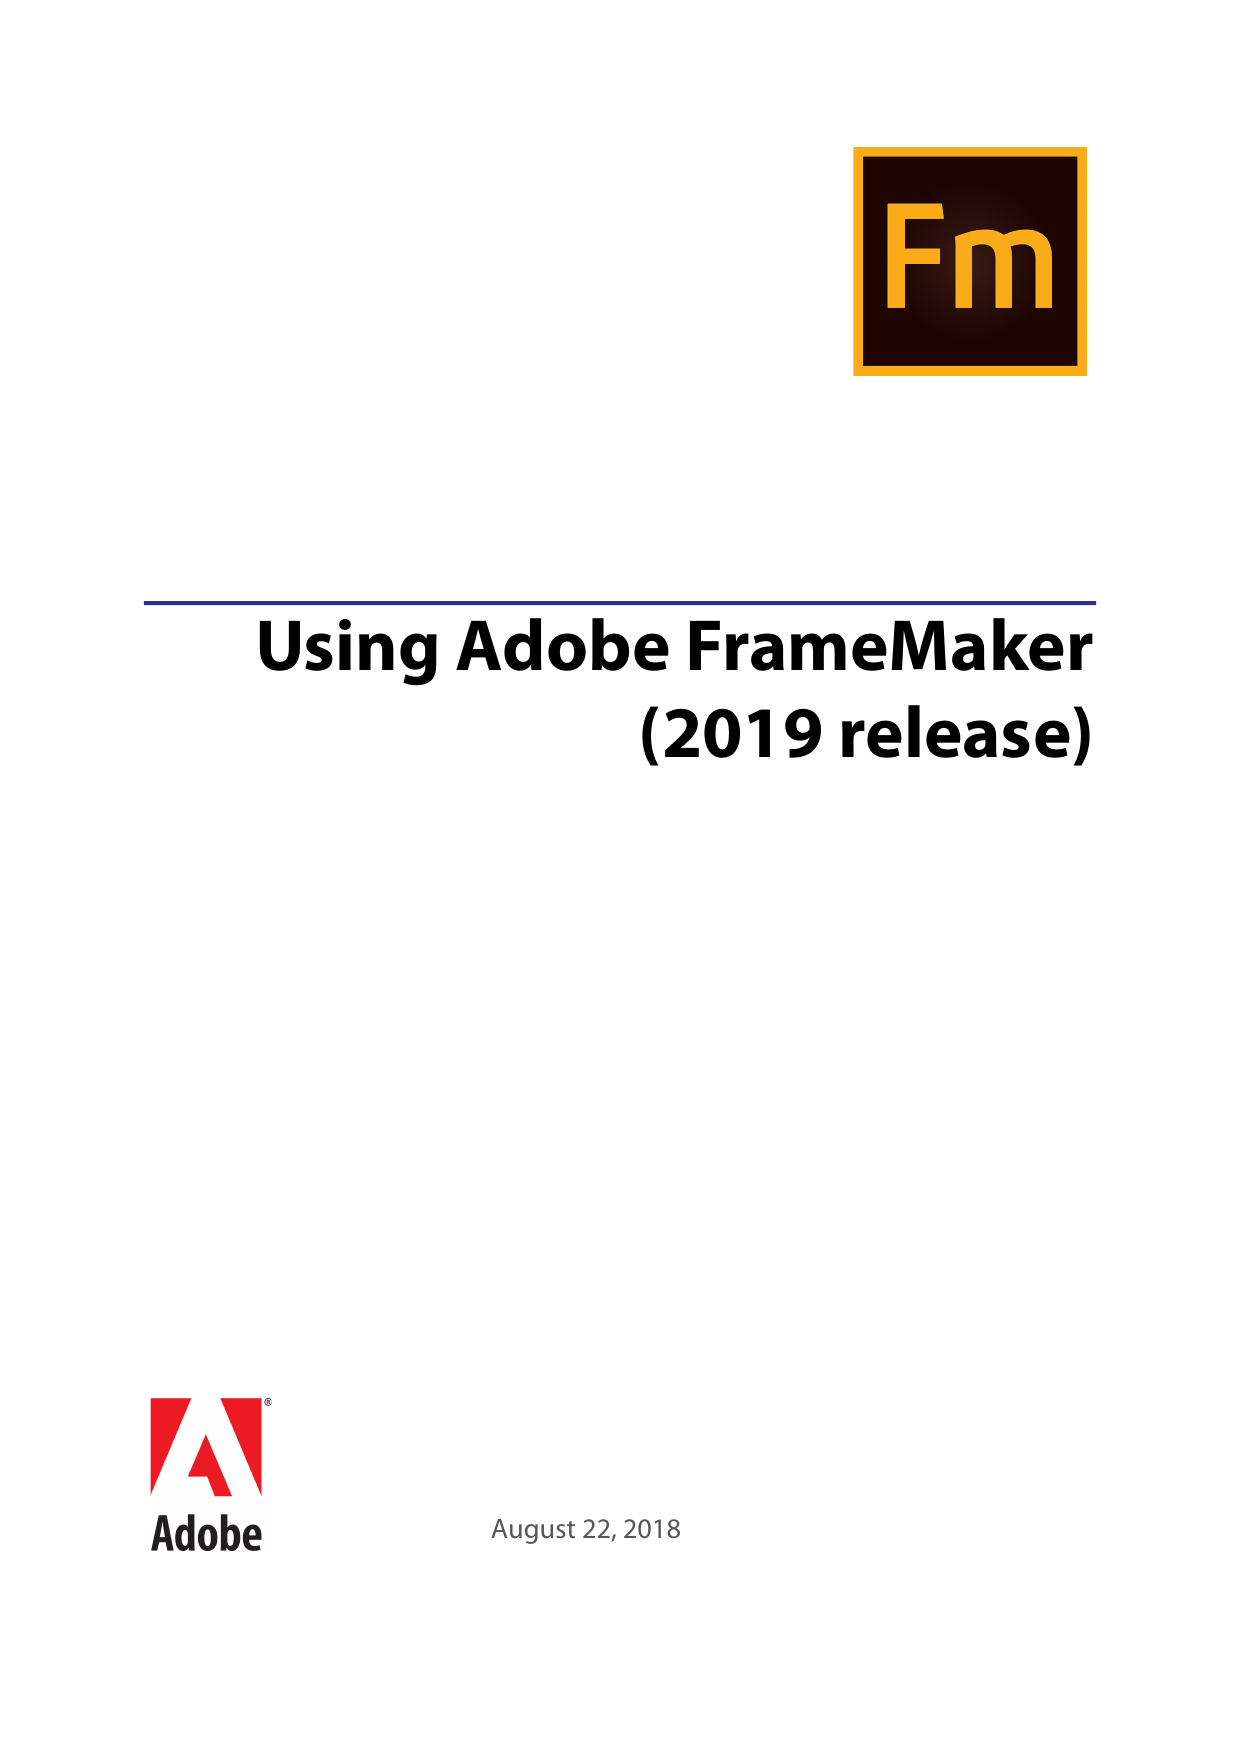 framemaker versions and year dates